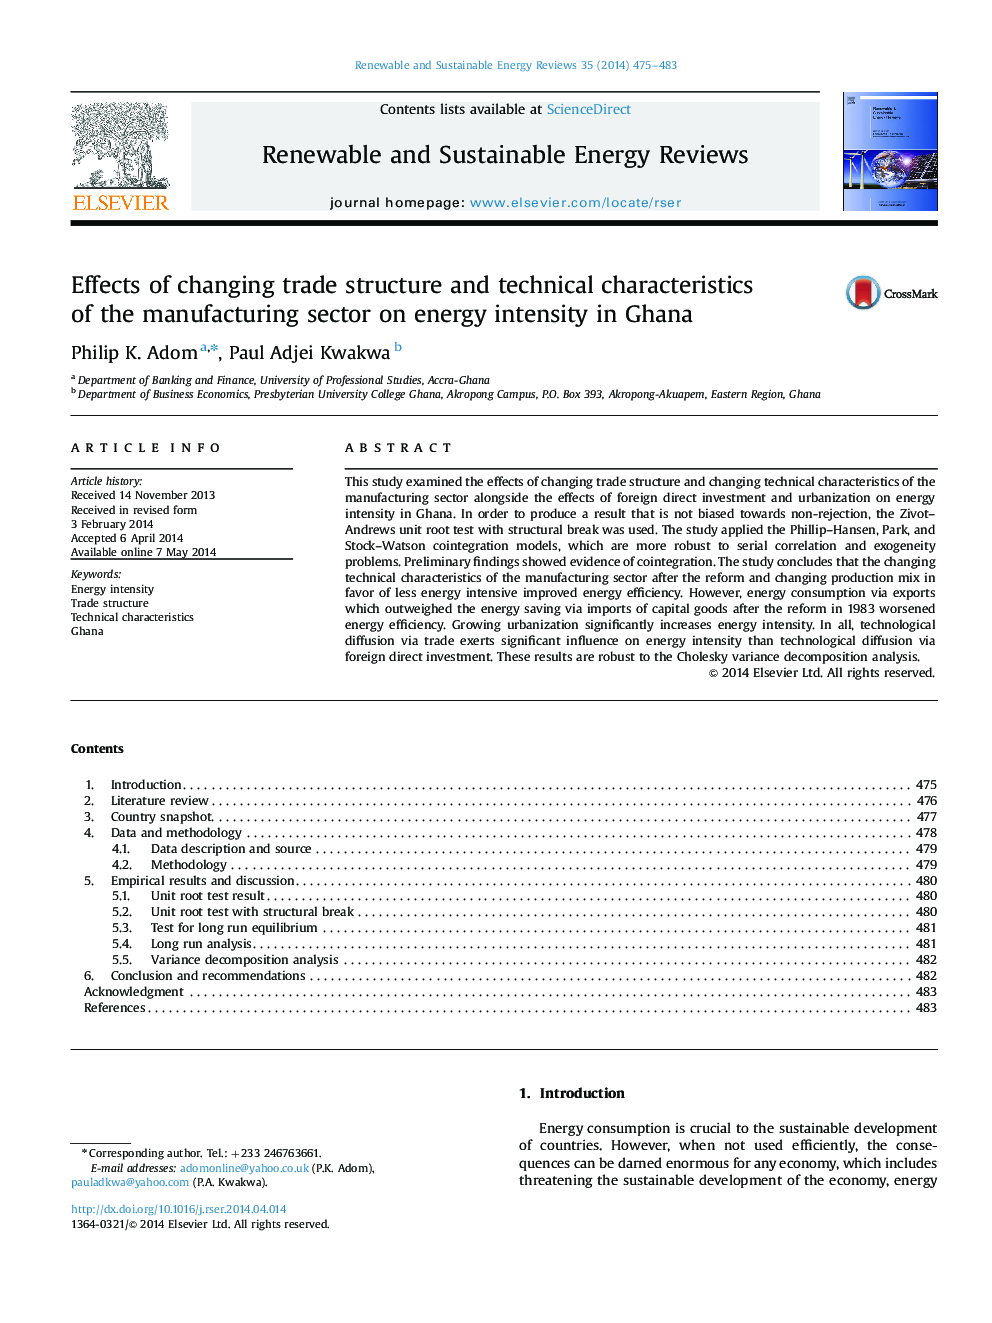 Effects of changing trade structure and technical characteristics of the manufacturing sector on energy intensity in Ghana